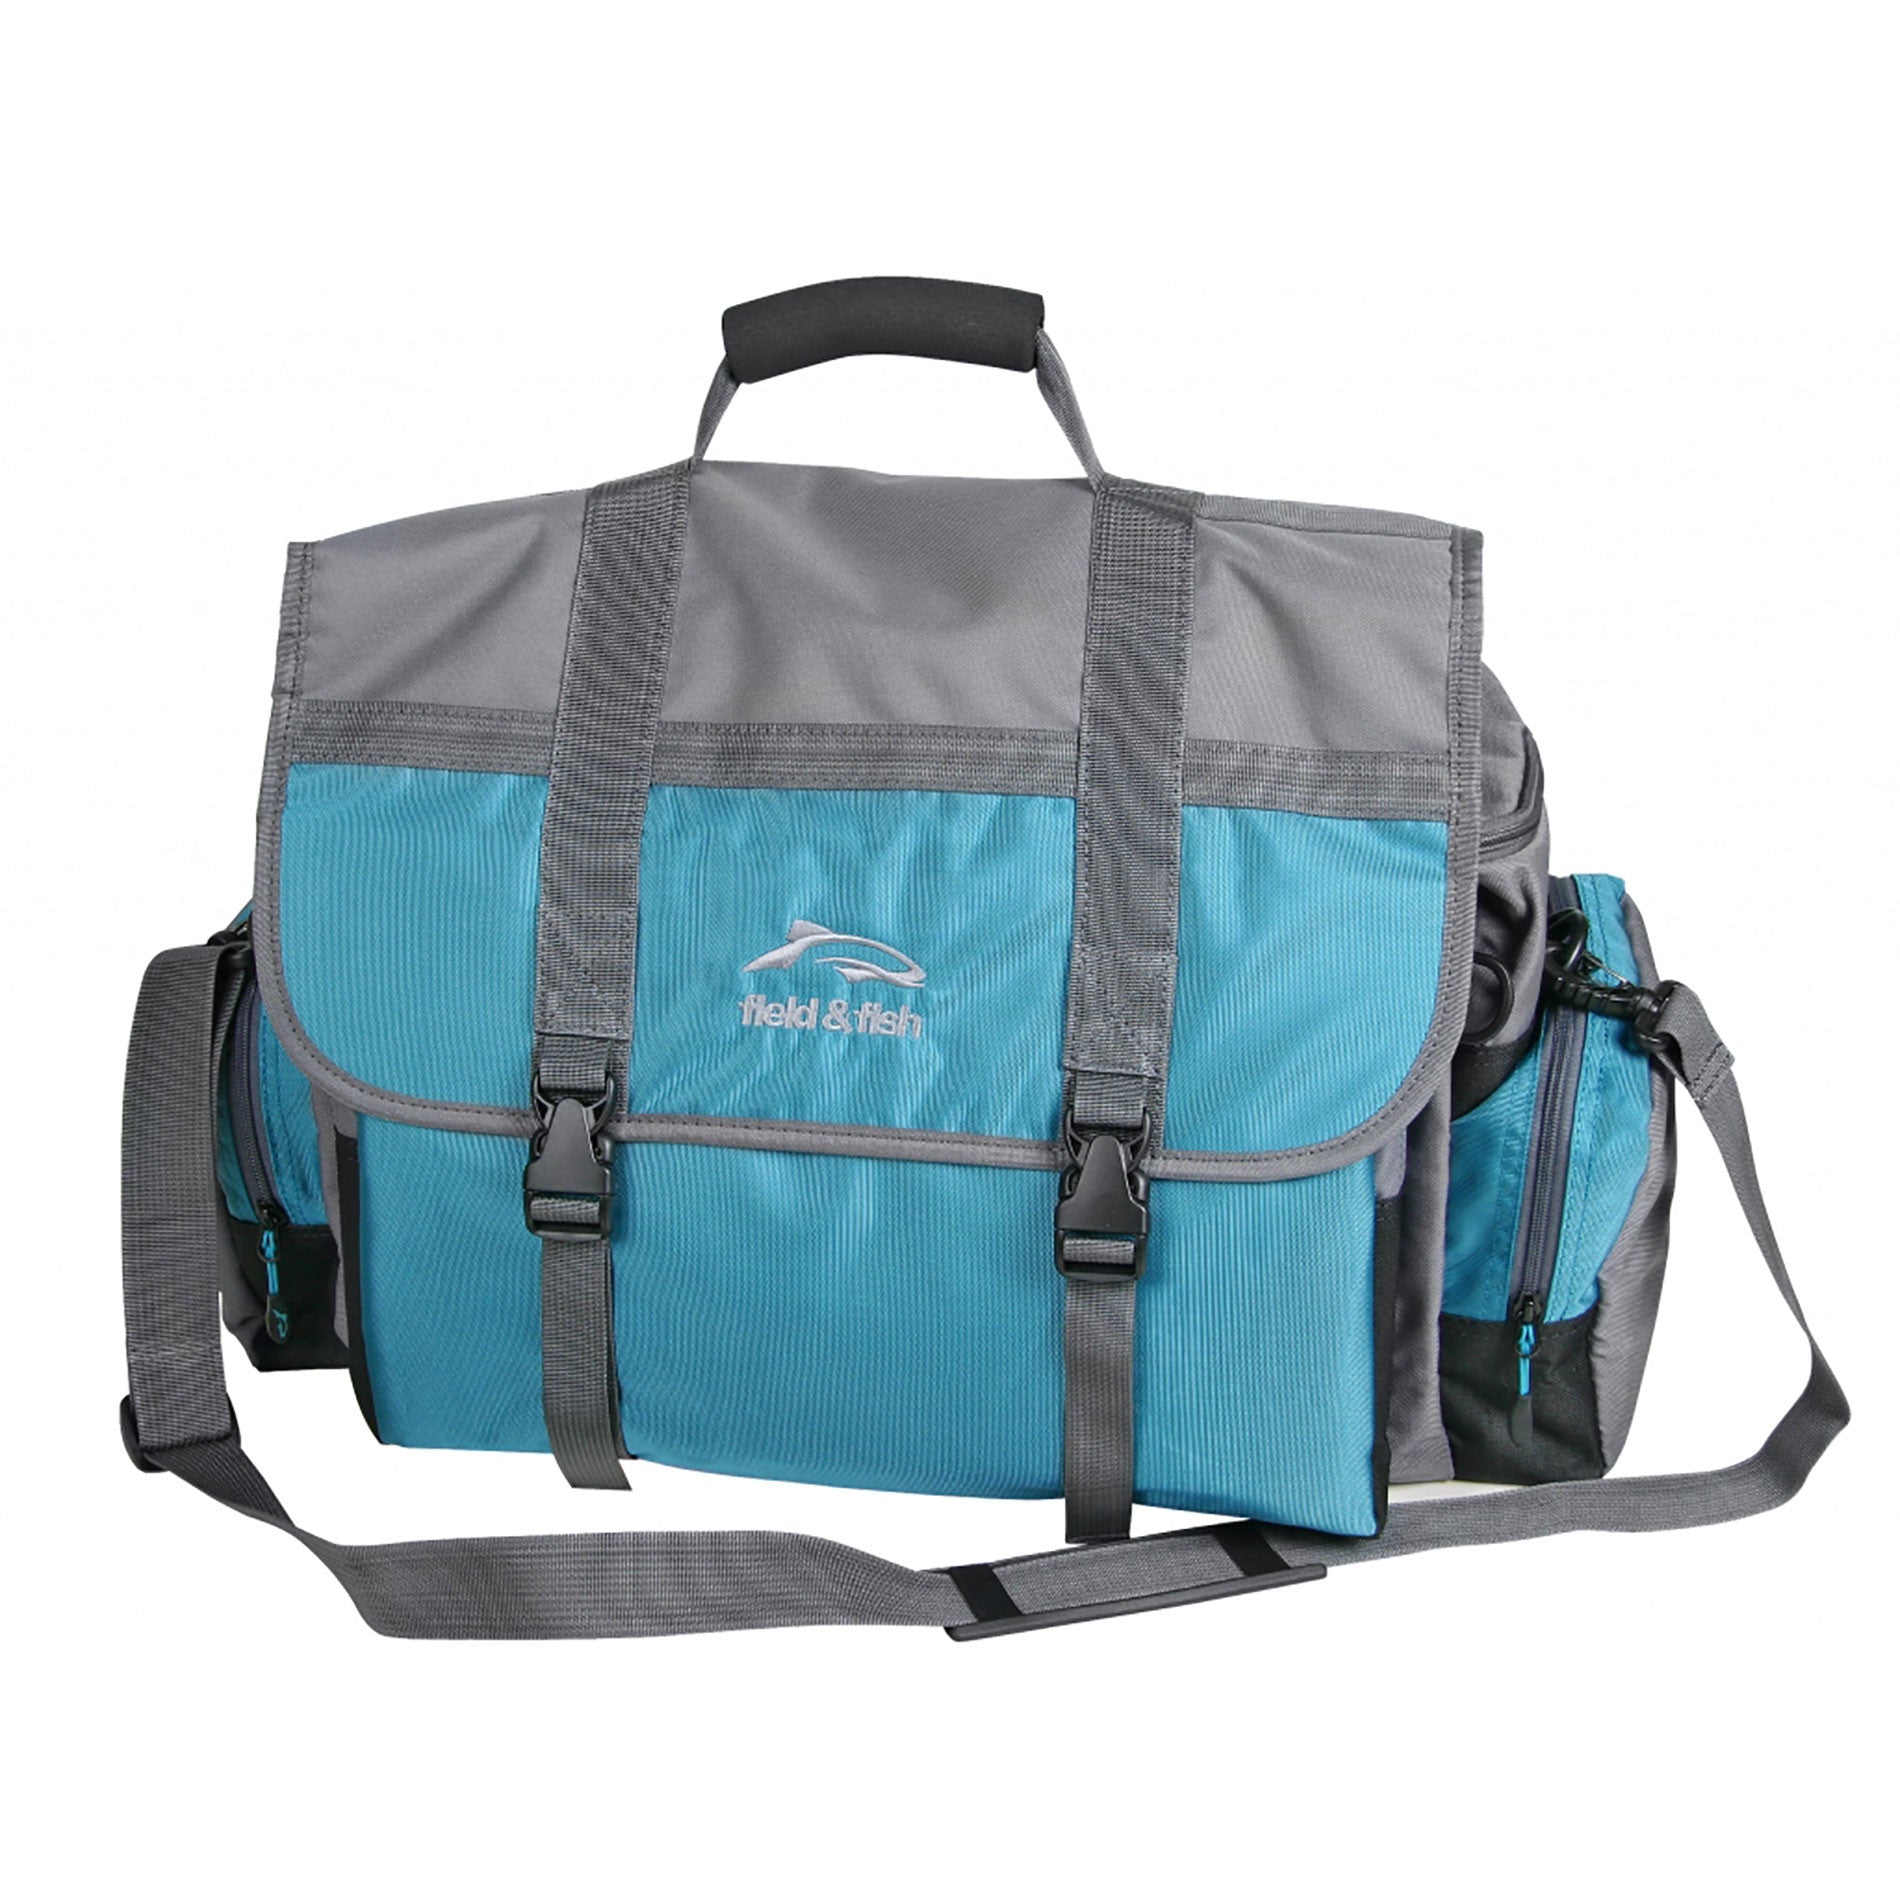 Andrew Toft large Fly Fishing gear bag – Spey Casting & Fly